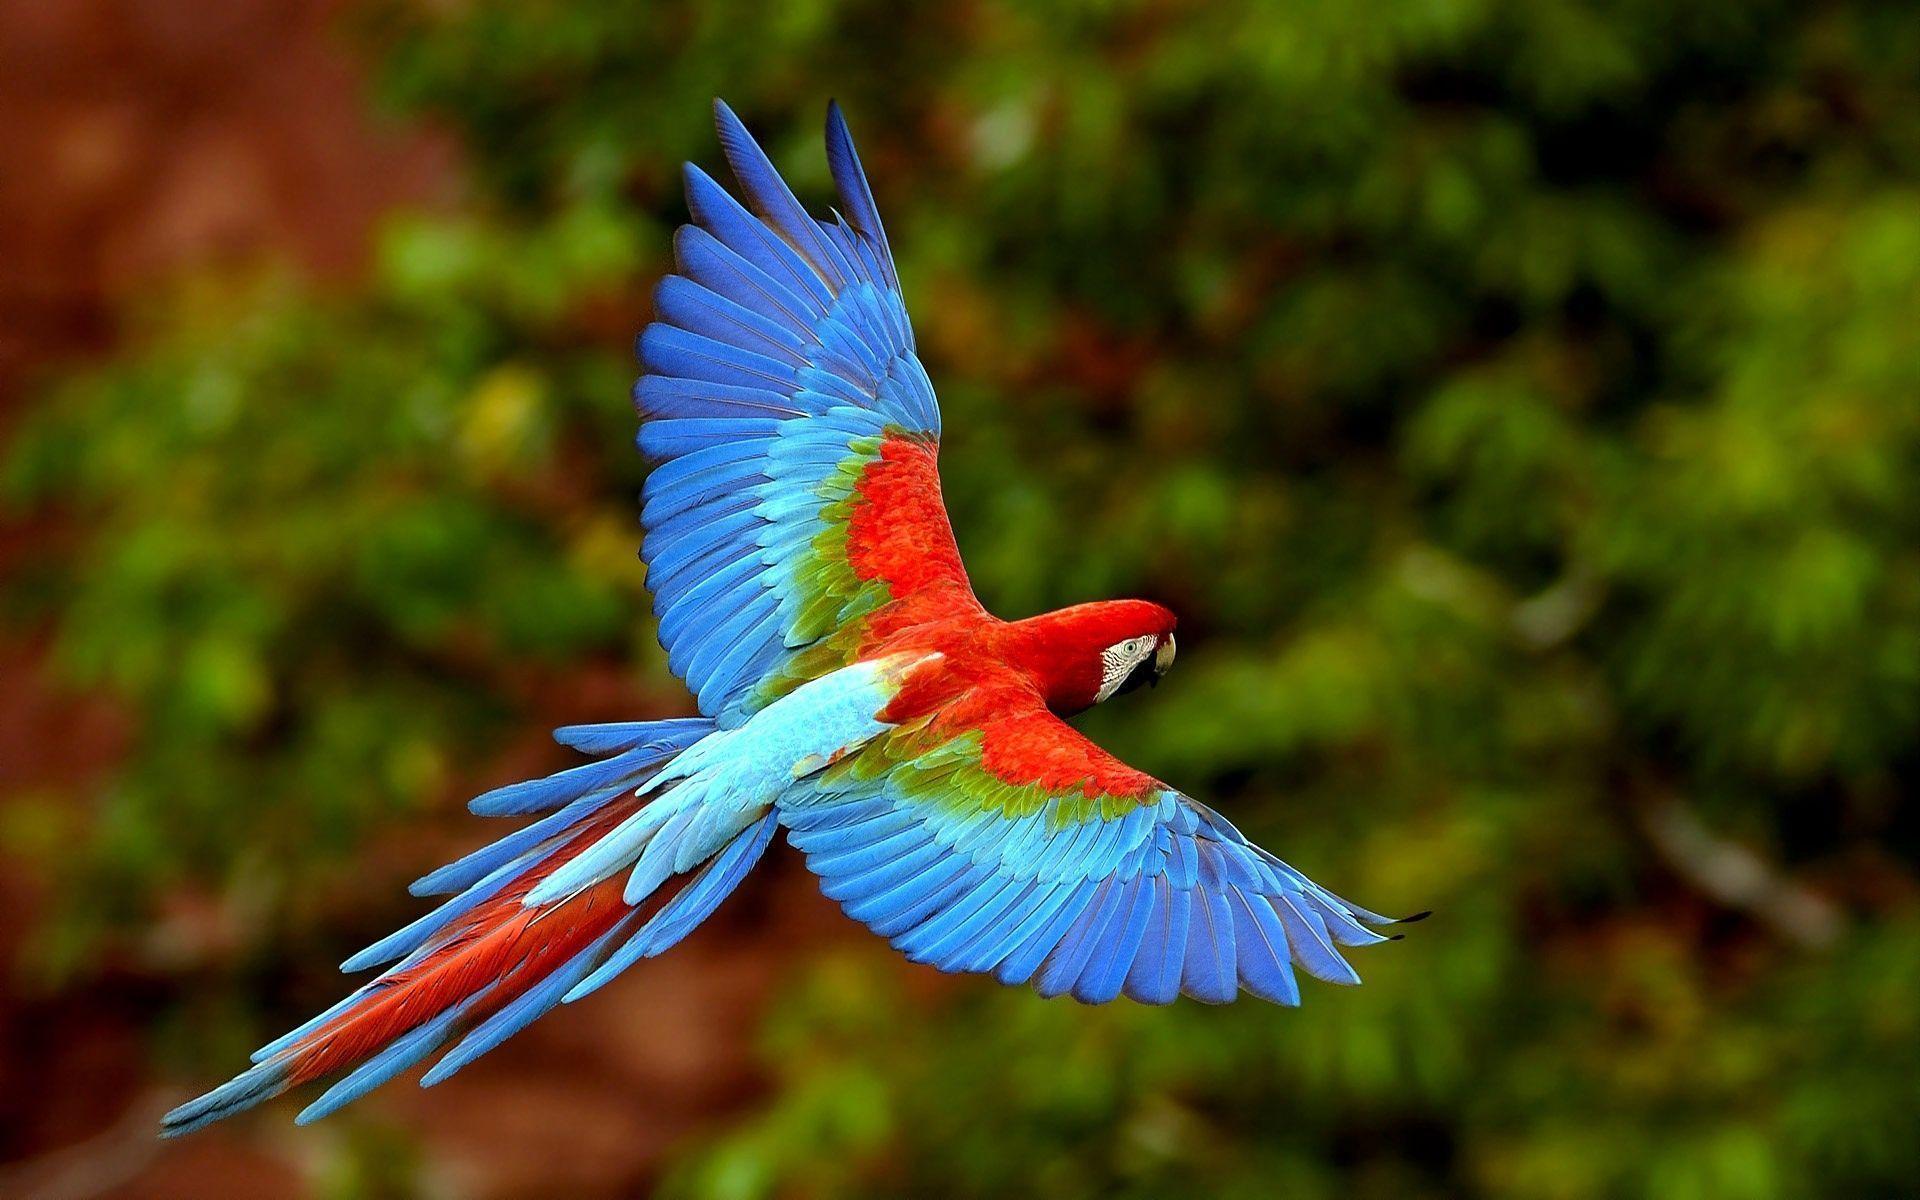 Parrot at flight background in 1920x1200 resolution. HD